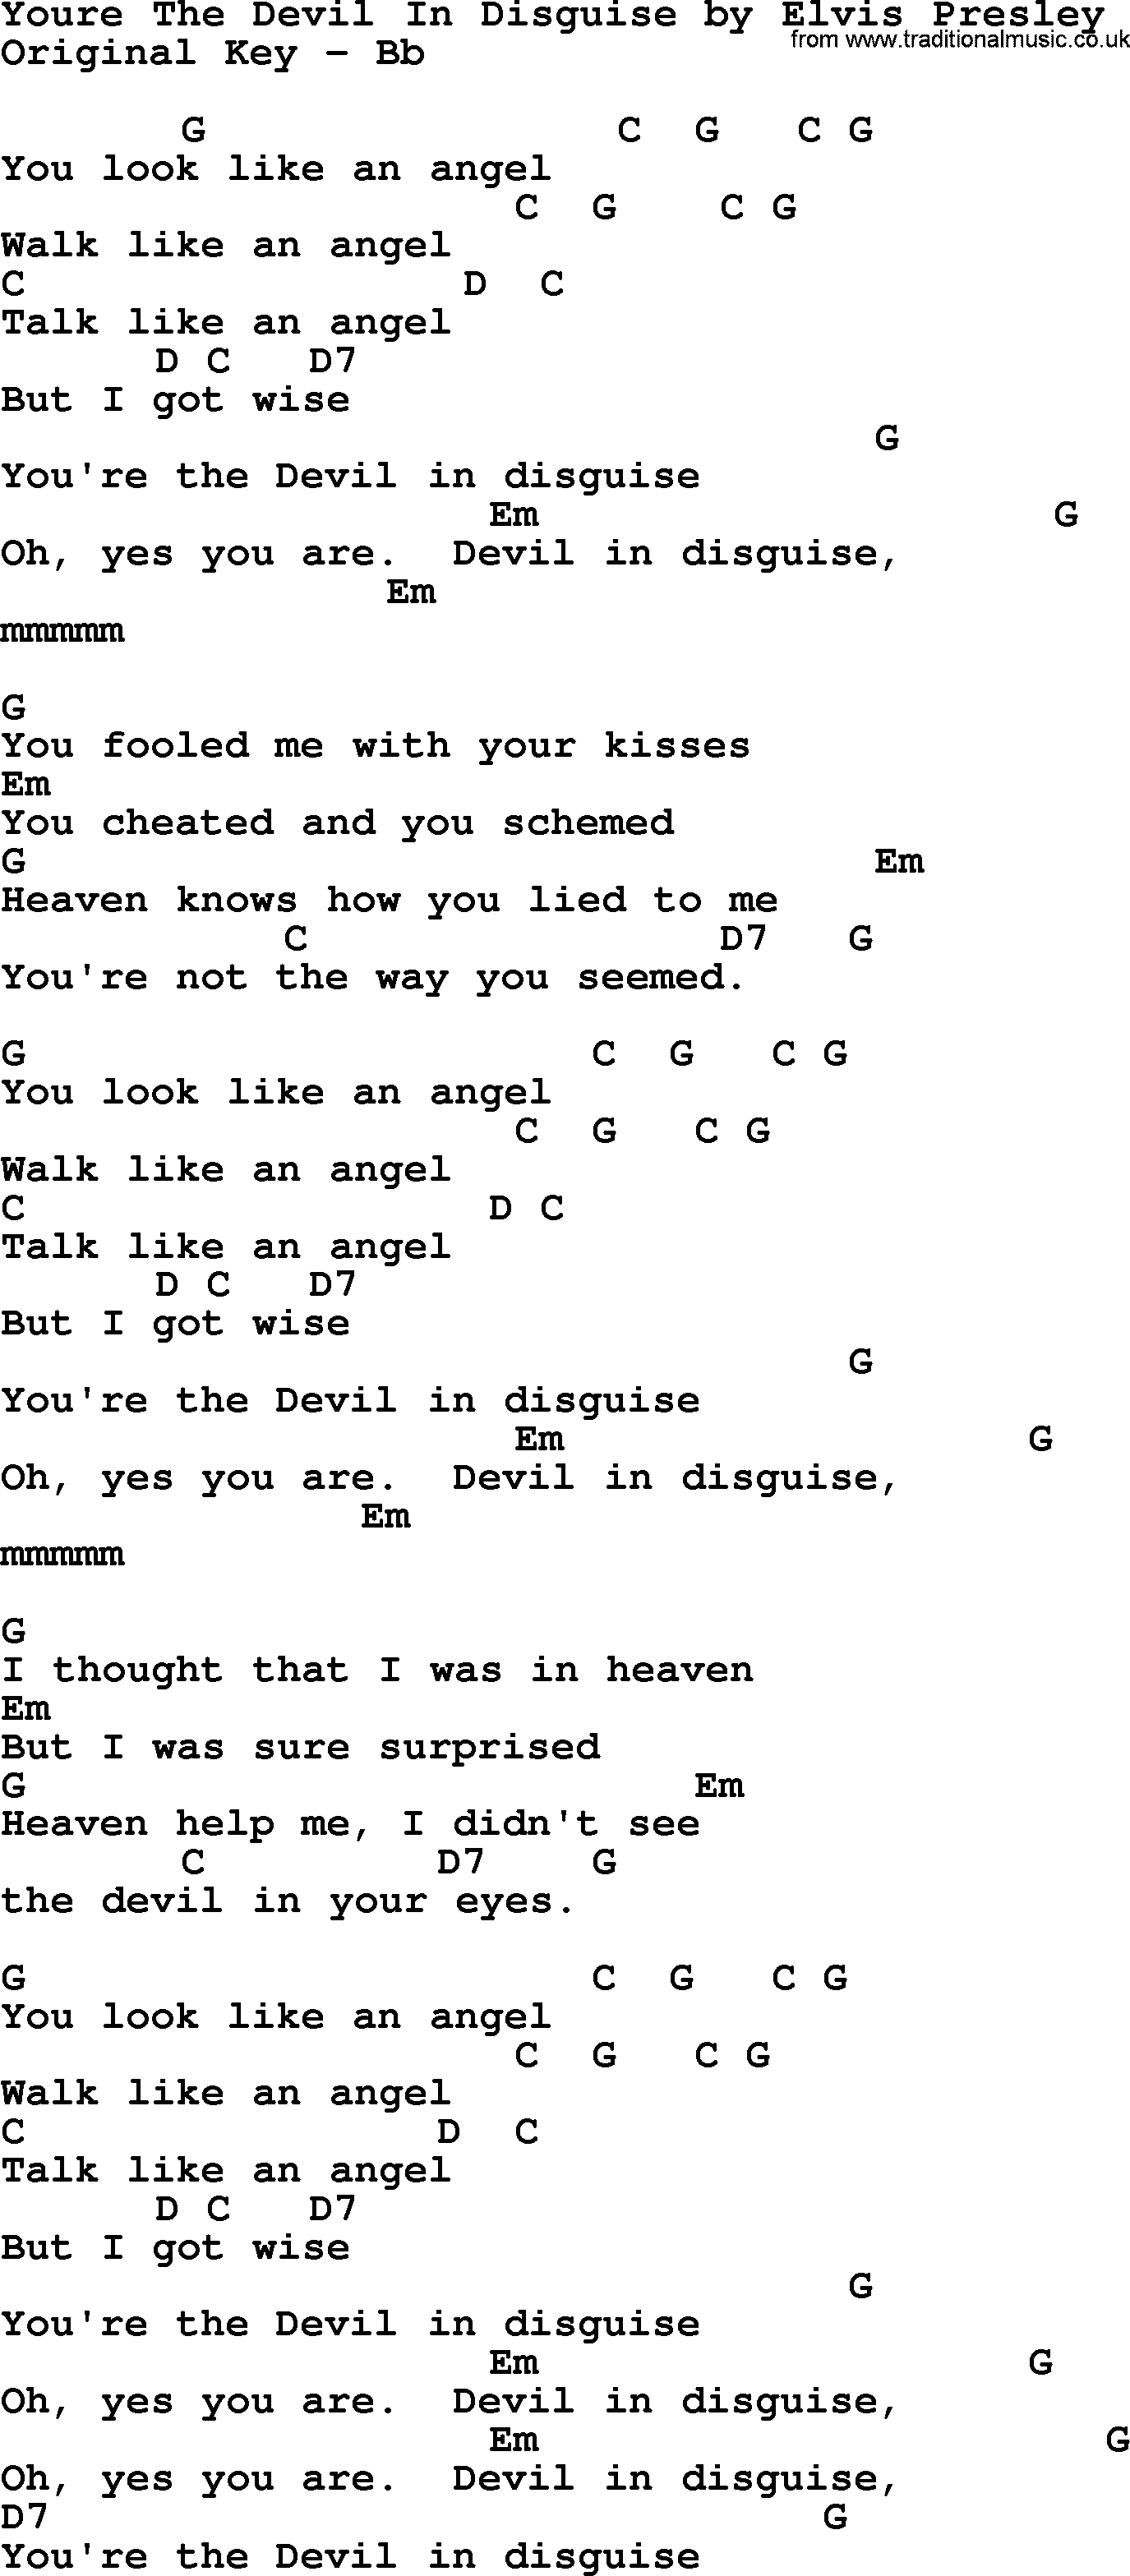 Elvis Presley song: Youre The Devil In Disguise, lyrics and chords